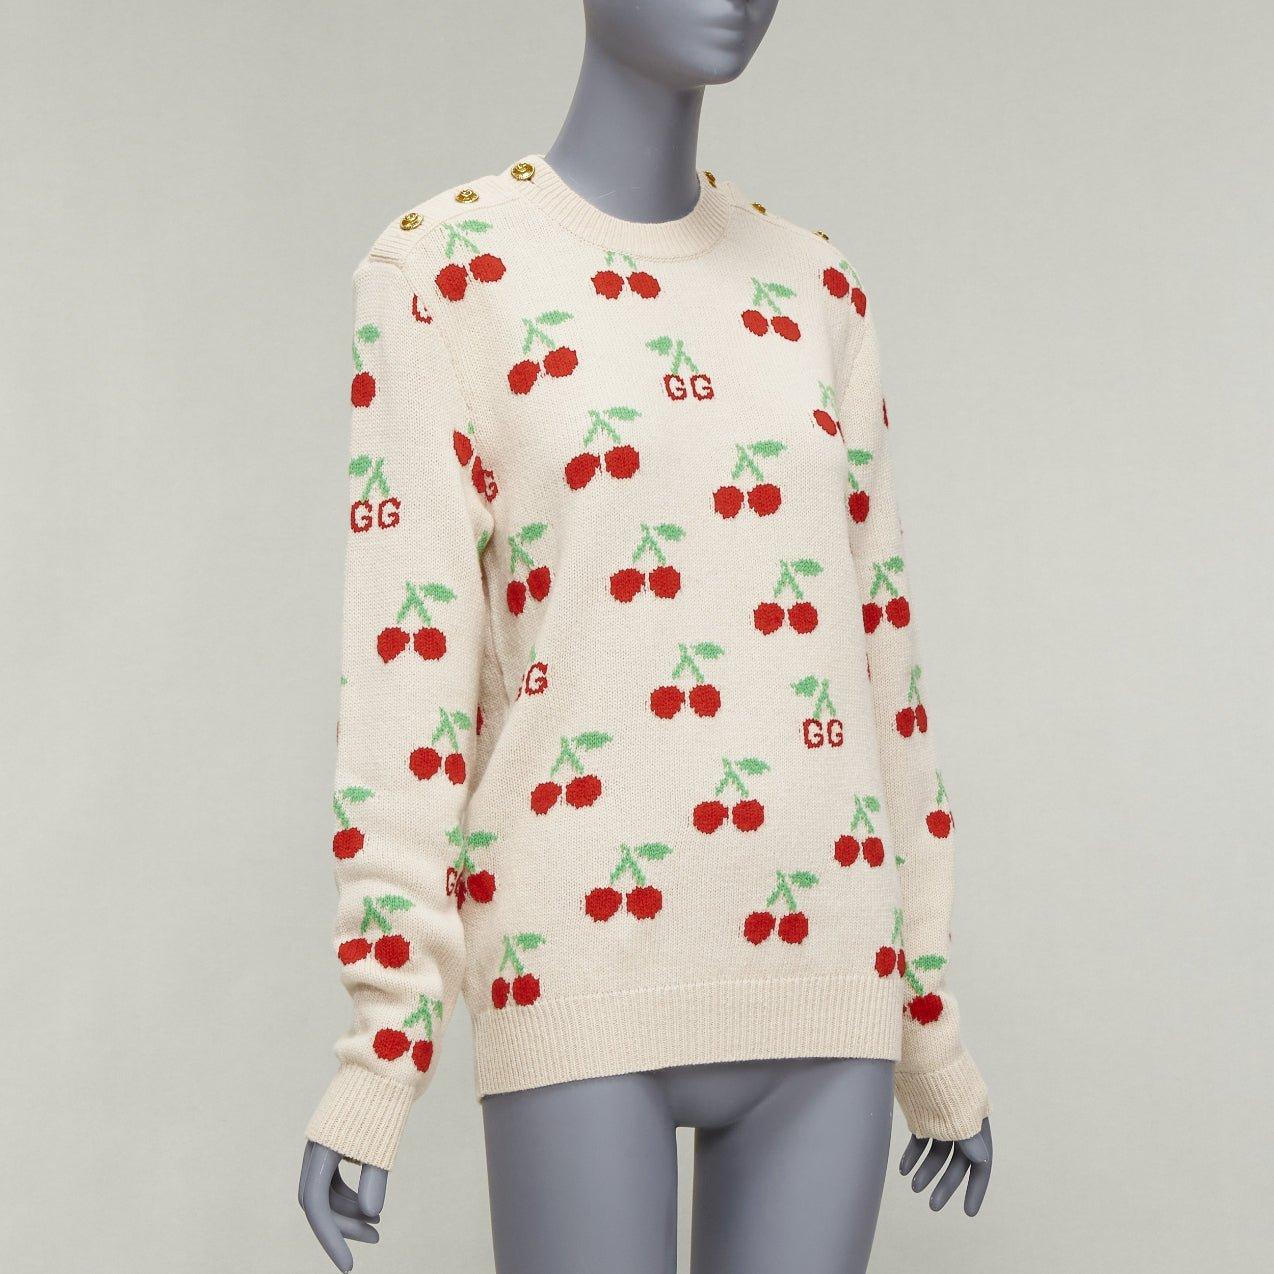 GUCCI 2023 beige red GG logo Cherries crew long sleeves sweater XS
Reference: AAWC/A00648
Brand: Gucci
Collection: 2023
Material: Wool
Color: Cream, Red
Pattern: Cartoon
Closure: Button
Extra Details: Long sleeve knit wool sweater in beige. Jacquard